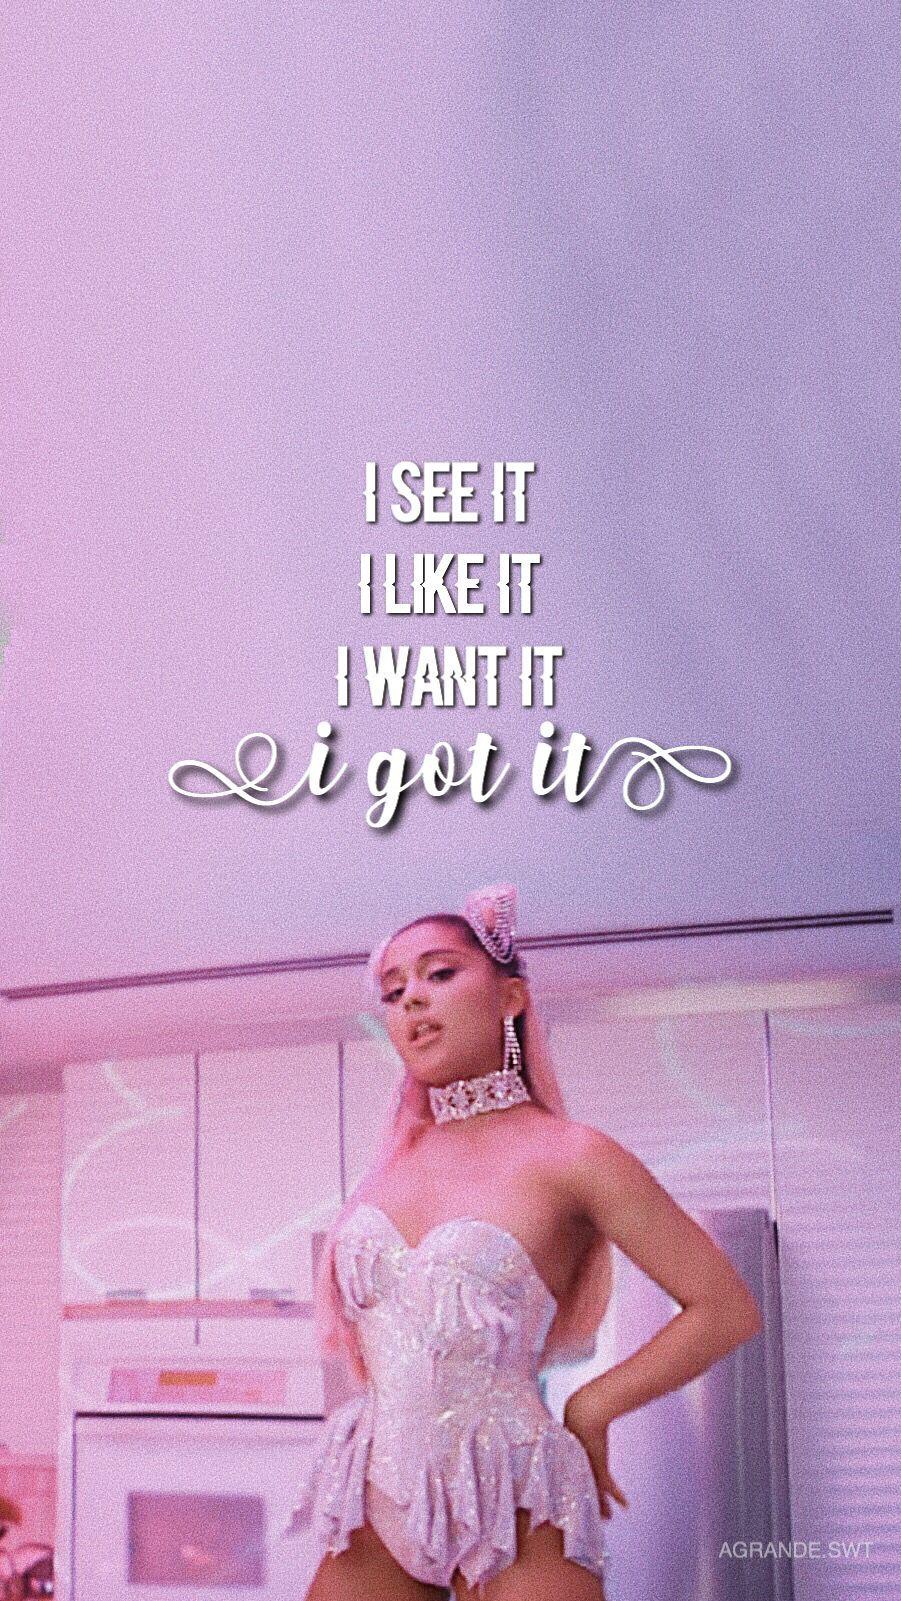 7 Rings Wallpapers Top Free 7 Rings Backgrounds